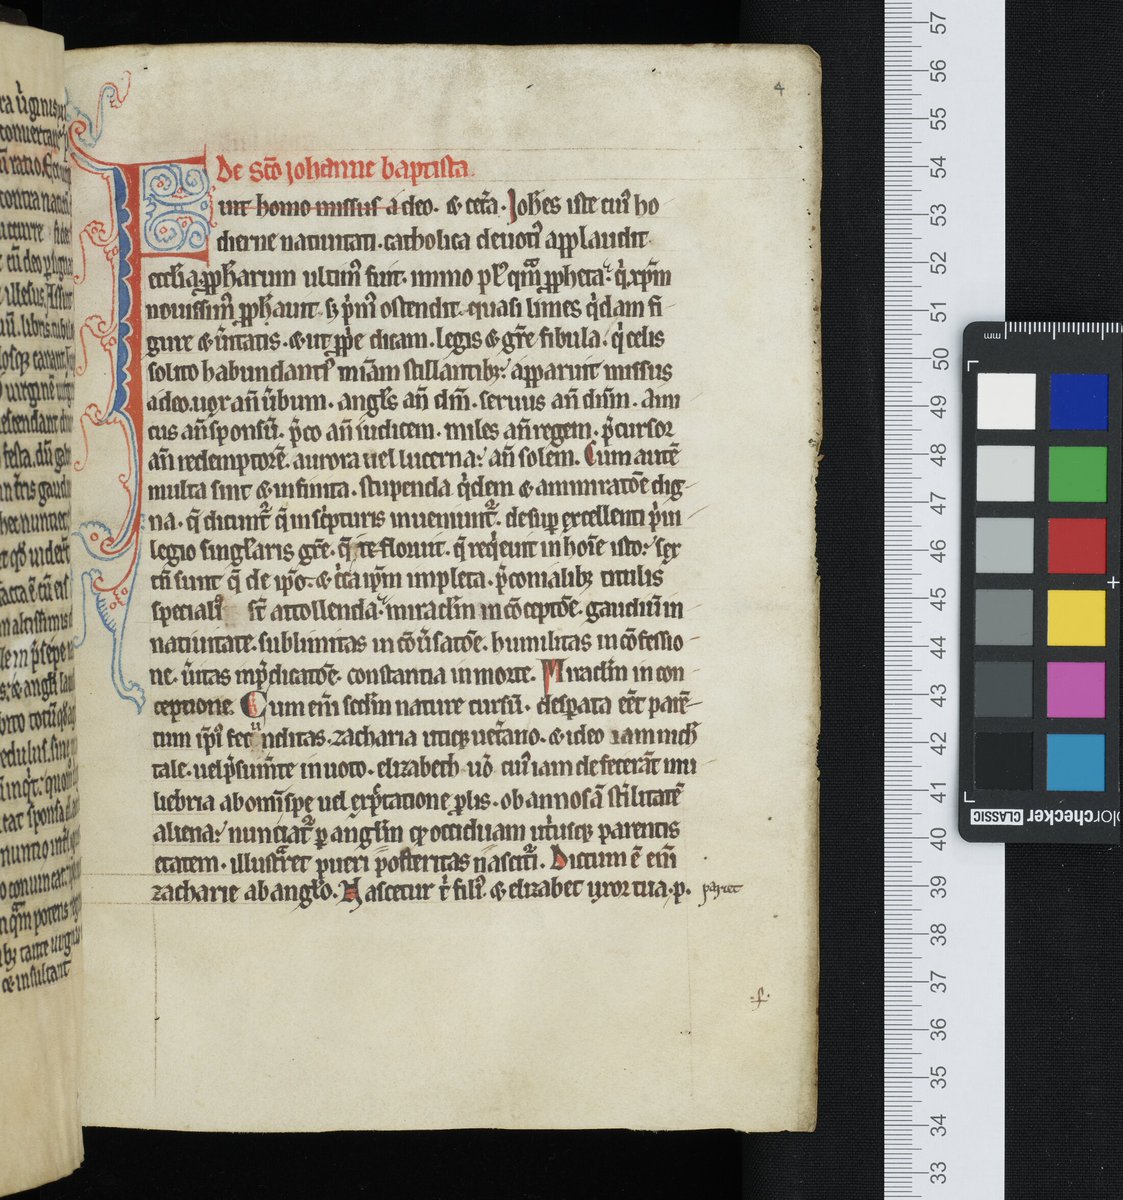 MS 134 is now available online. This 13th century manuscript contains mostly sermons by Geoffrey of St Thierry, but also a good number of unidentified sermons. (Pictured: 3v and 4r) You can view it here: digital.bodleian.ox.ac.uk/objects/2ebaf1…